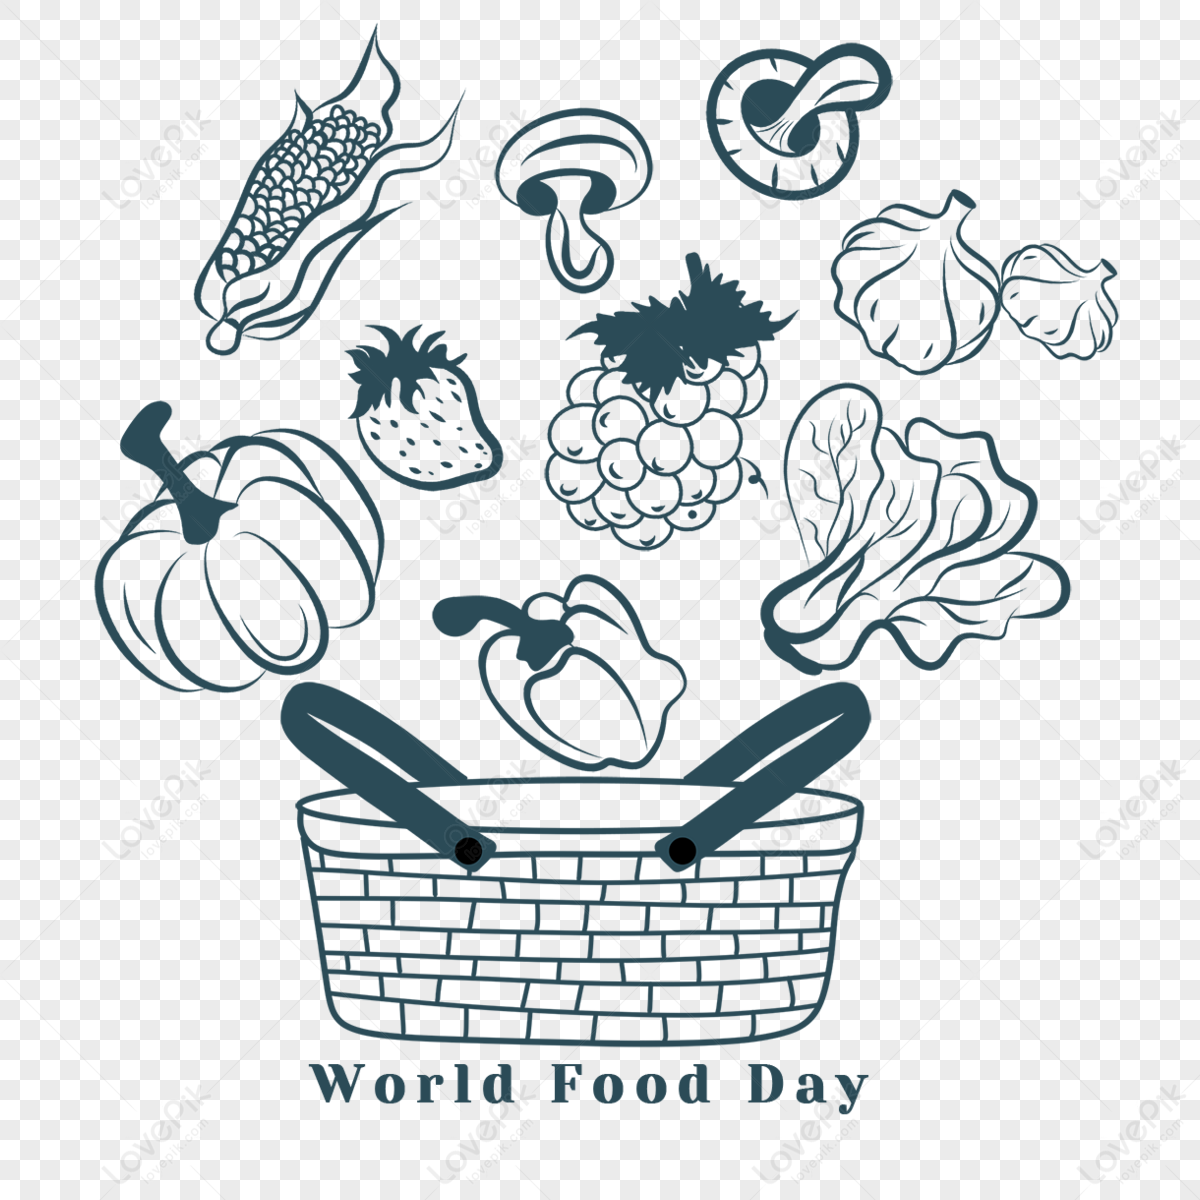 World Food Day Drawing Sketch Fruits Stock Vector (Royalty Free) 1311257324  | Shutterstock